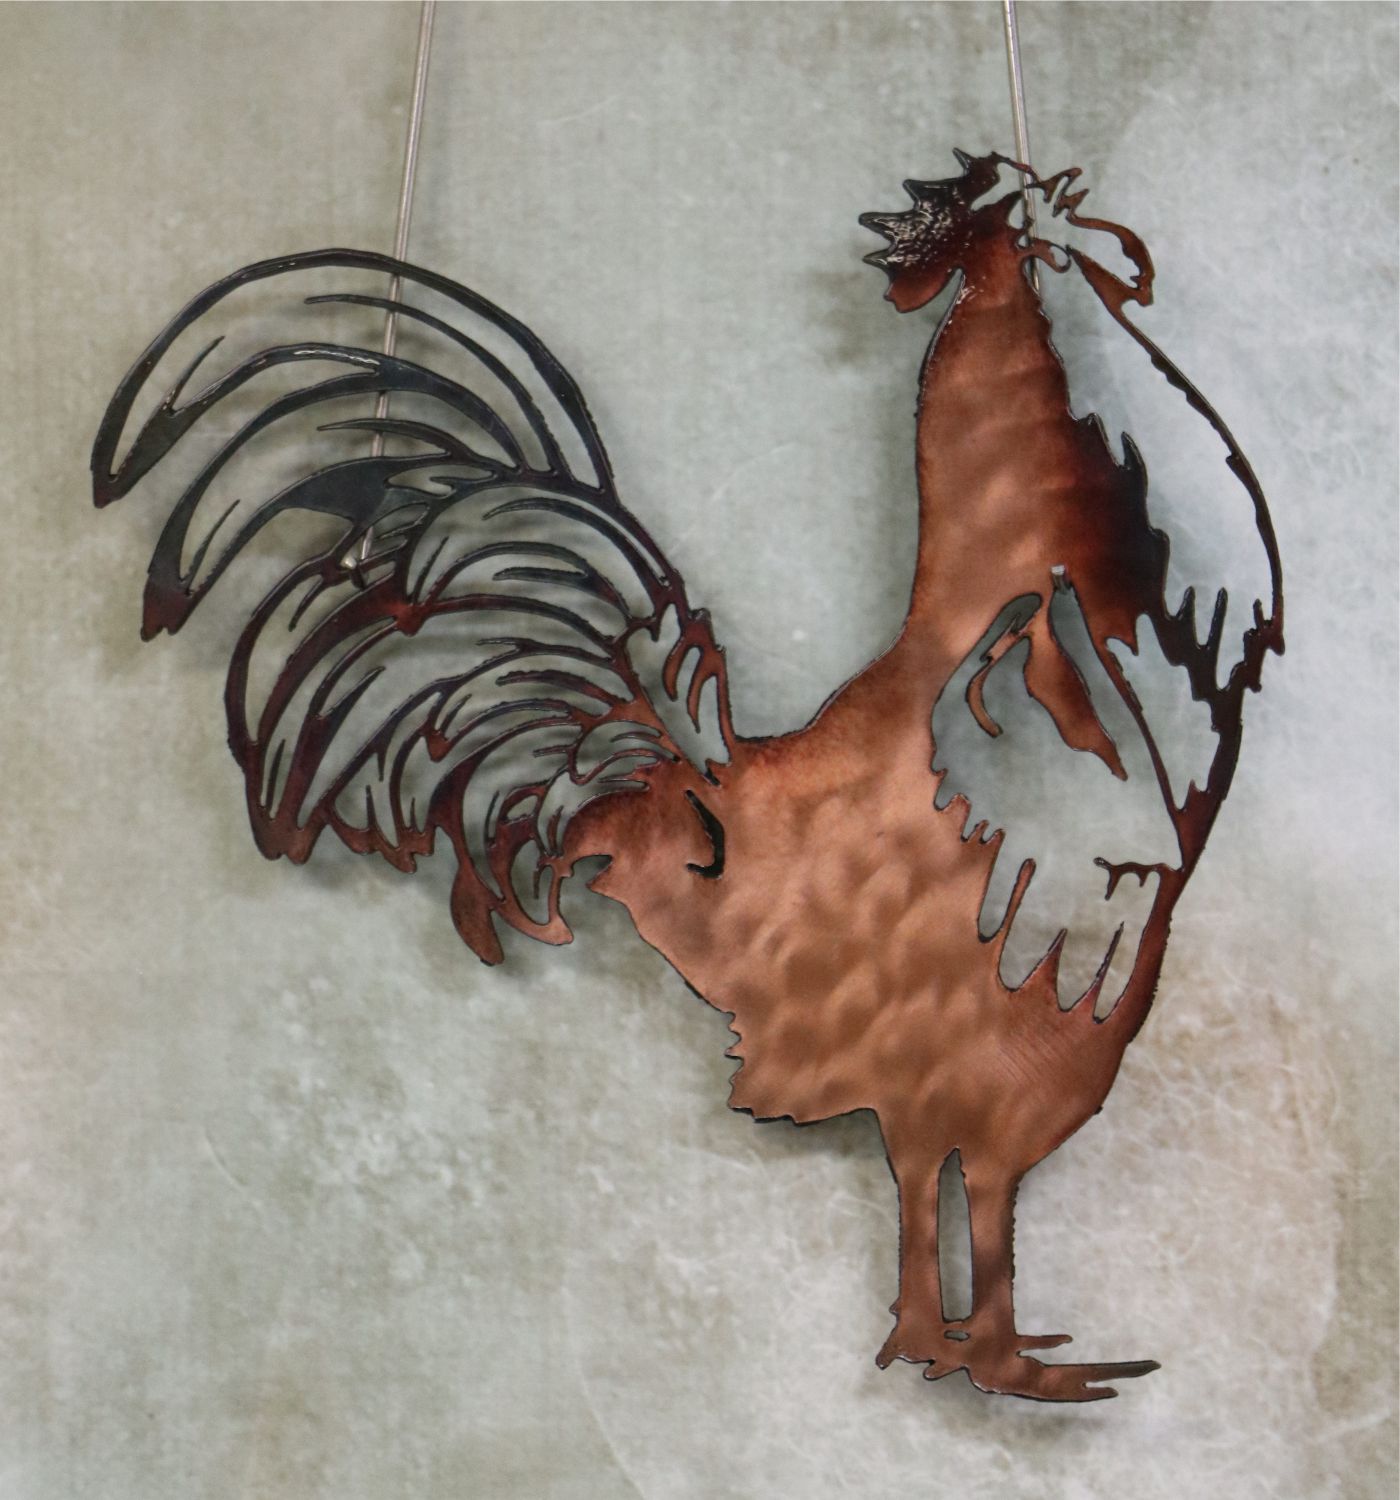 Wall Metal Art, Chicken, Bird, Tail Feathers, Comb, Legs, Beak, Copper, Rooster, Crow, Cock-a-doodle-do